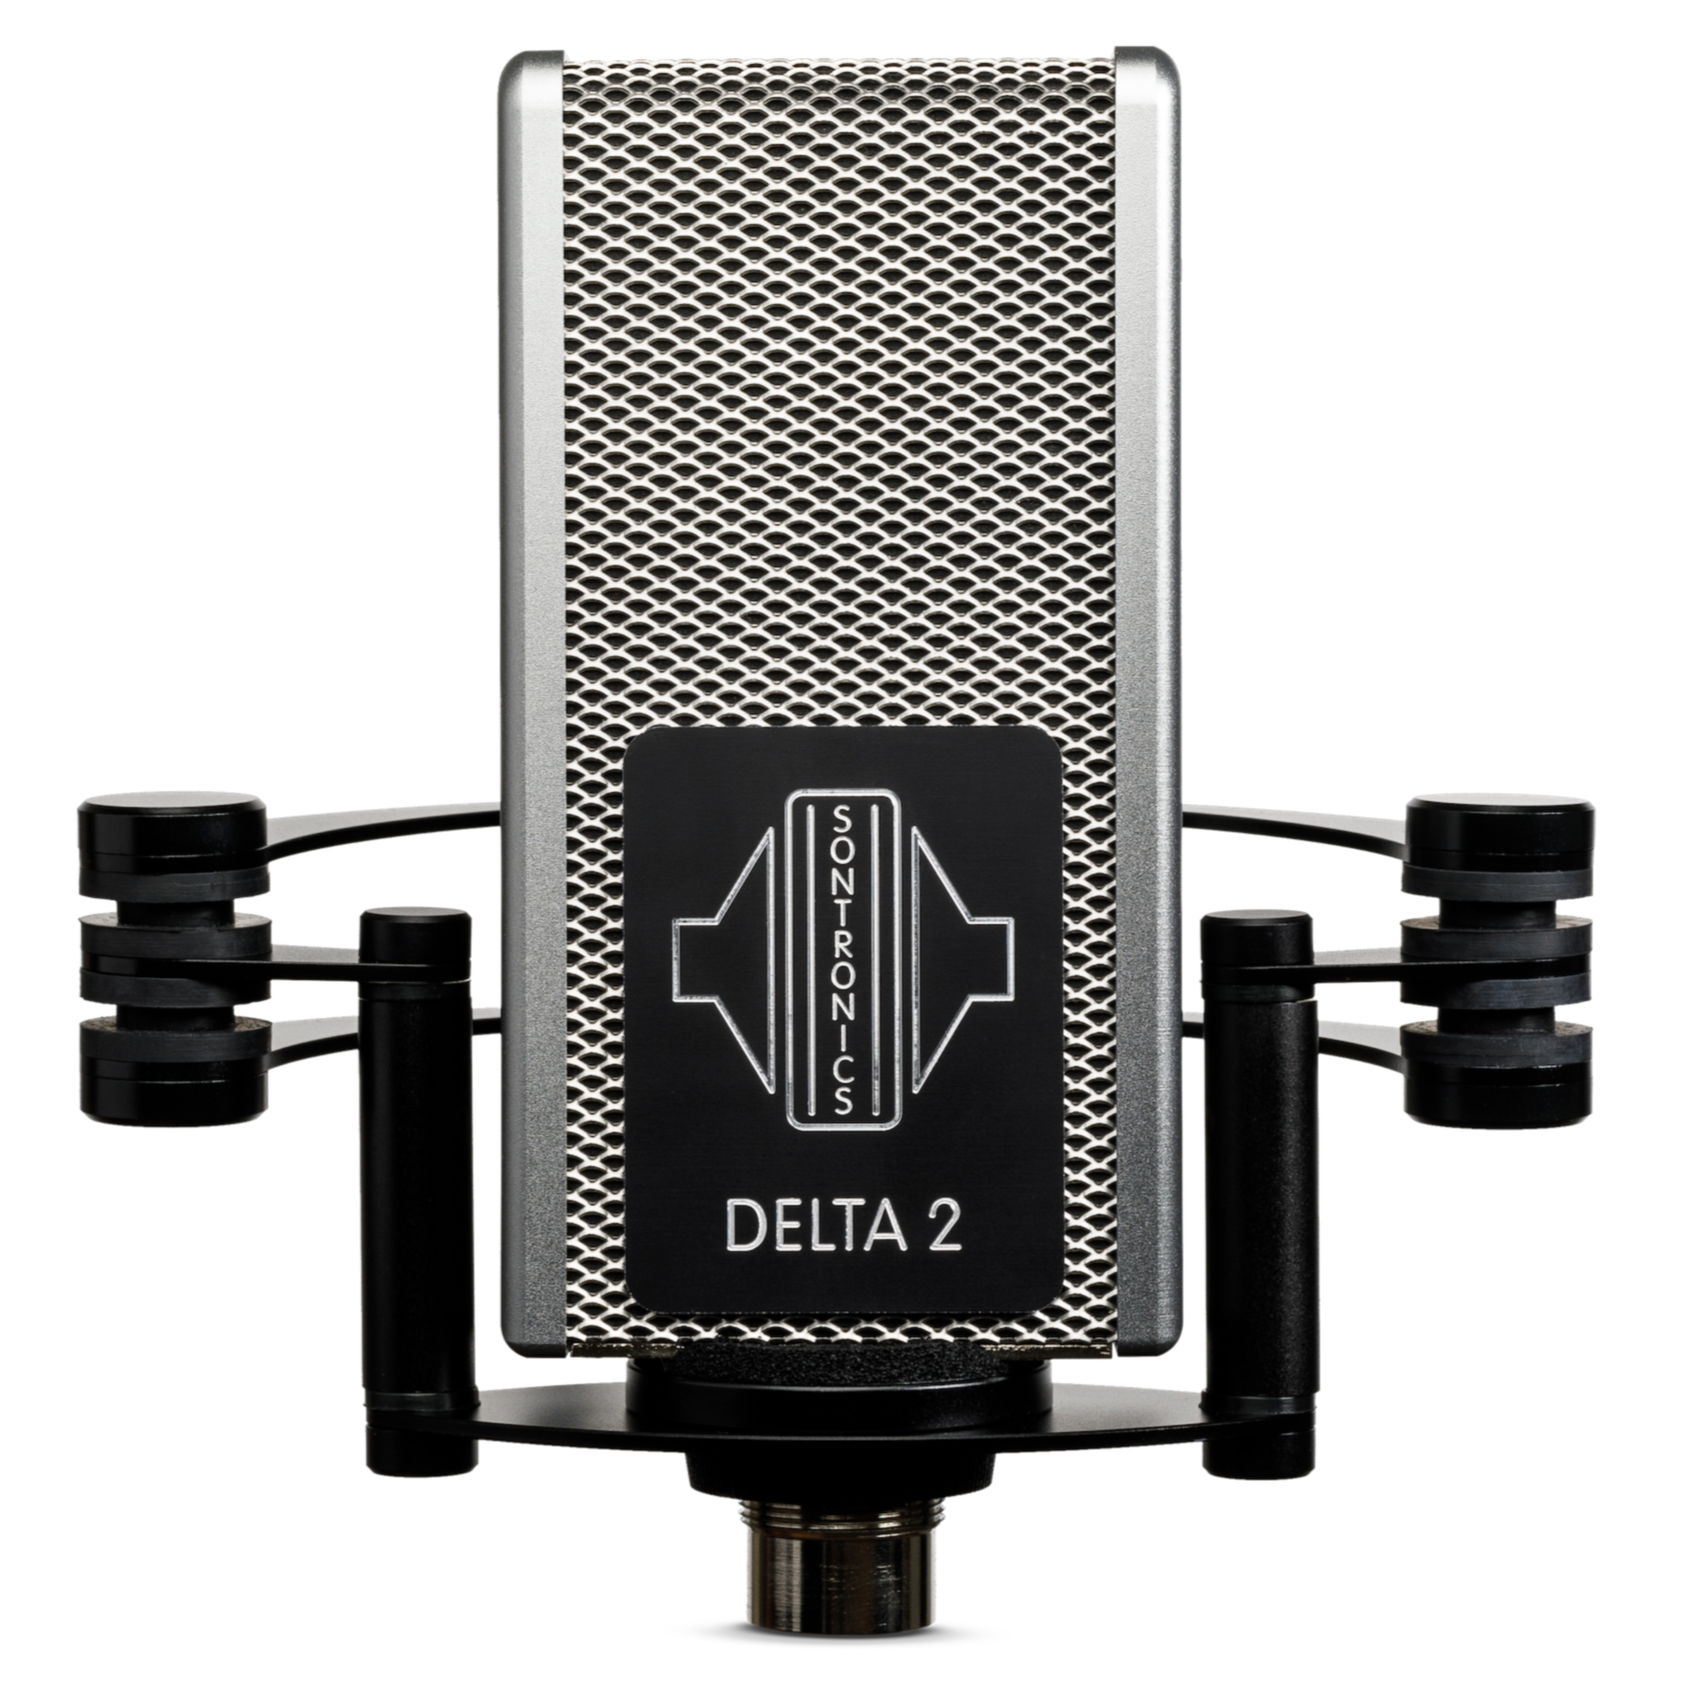 Image on white background of Sontronics Delta 2 microphone facing forwards. The rectangular body with its silver mesh grille and silver side panels has a black plate on the front engraved with a silver logo and silver 'Delta 2' name. The microphone sits in its shockmount with two side supports and rear arcs